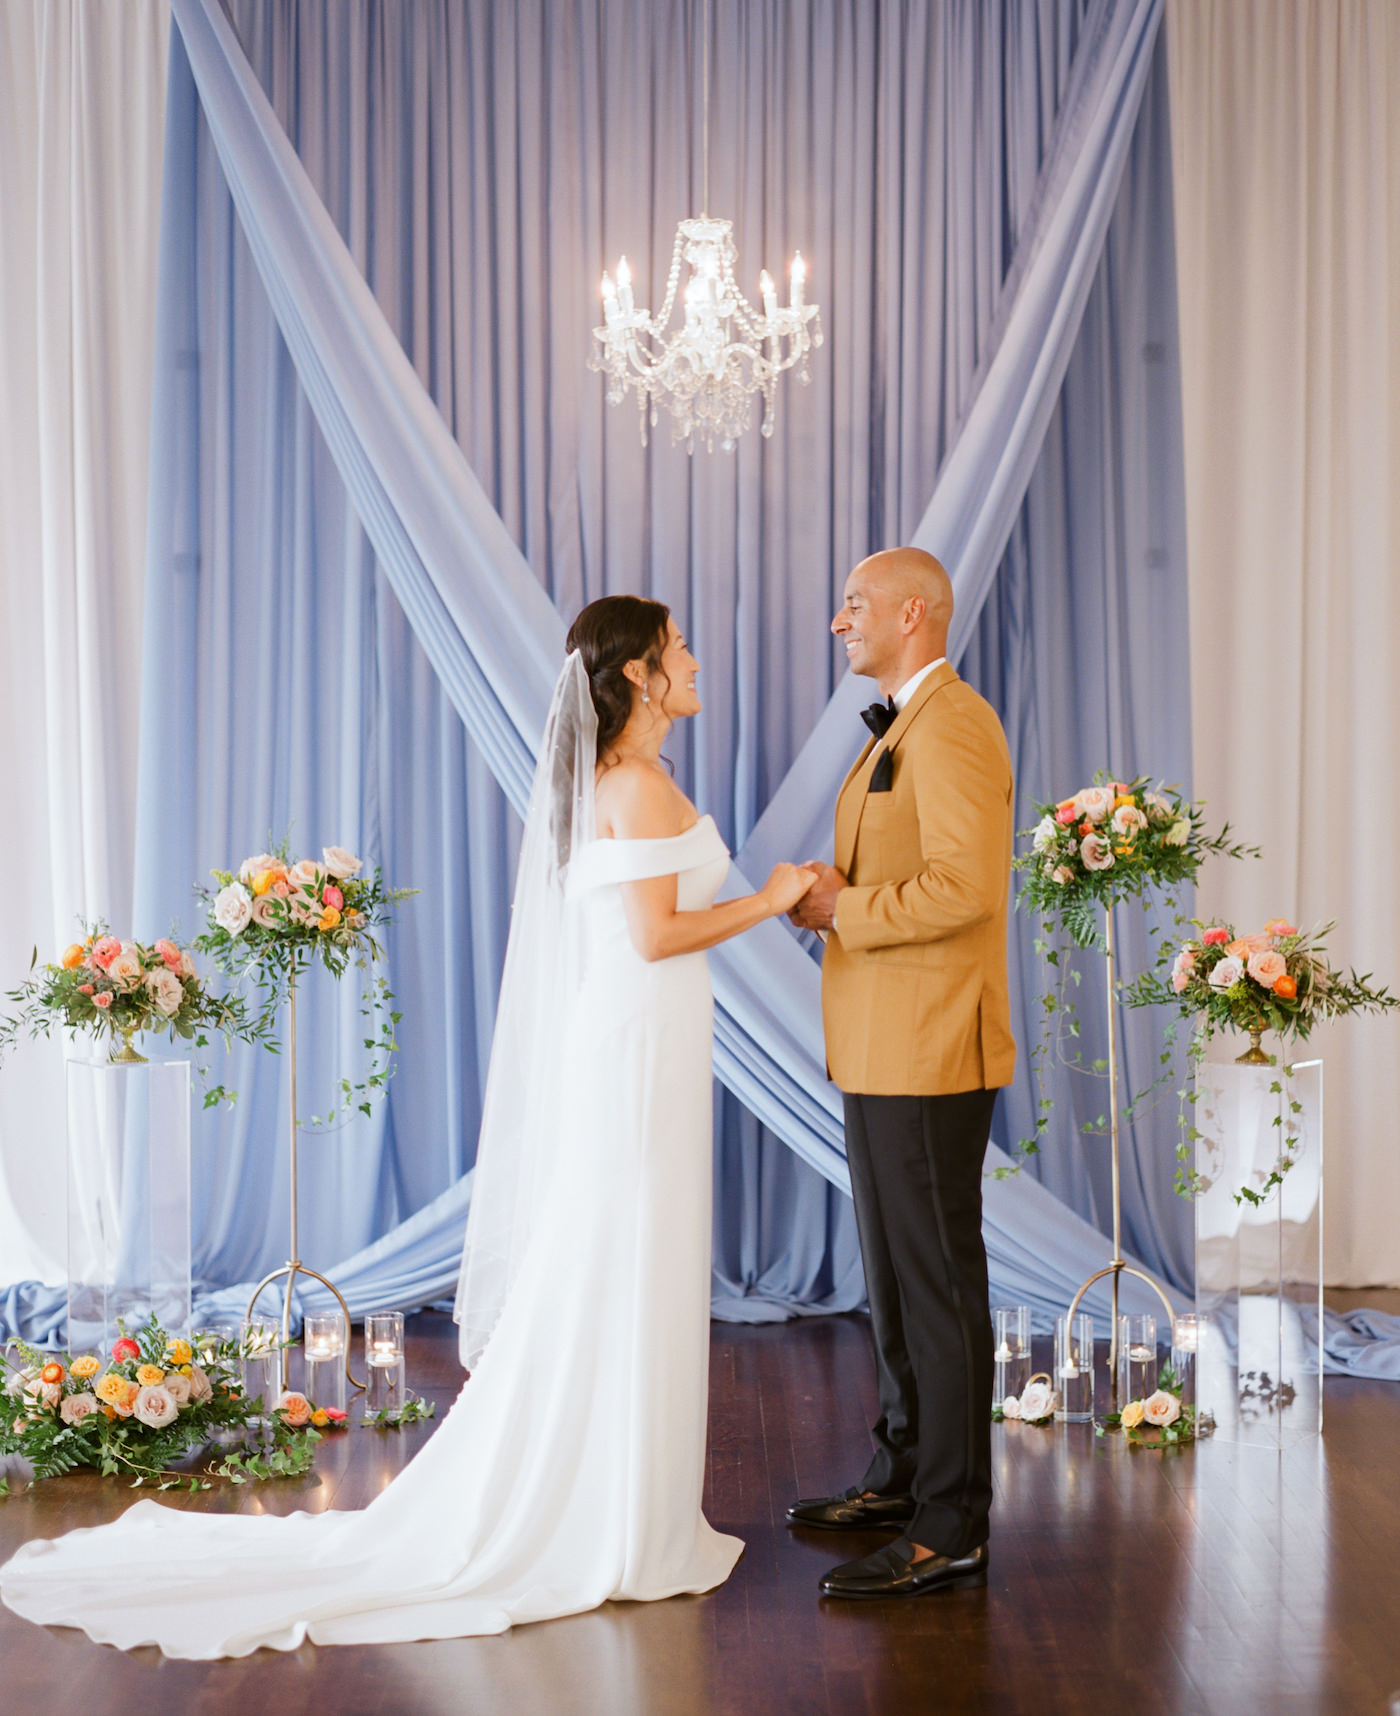 Sophisticated Tampa Bay Bride and Groom Exchange Vows During Intimate Styled Shoot Wedding, Elegant Ceremony Decor with Lush Velvet Blue Draping, Romantic Crystal Chandelier, Decorated with Springtime Inspired Florals, Pink Roses, Peach Carnations, Yellow Flowers, Pops of Gold Accents with Greenery, Bride in Off the Shoulder Long Sheath Wedding Dress, Groom Wearing Mustard Yellow Suit Jacket from The Black Tux | Tampa Bay Wedding Planner Kelly Kennedy Weddings and Events | Florida Luxury Rental Company Kate Ryan Event Rentals